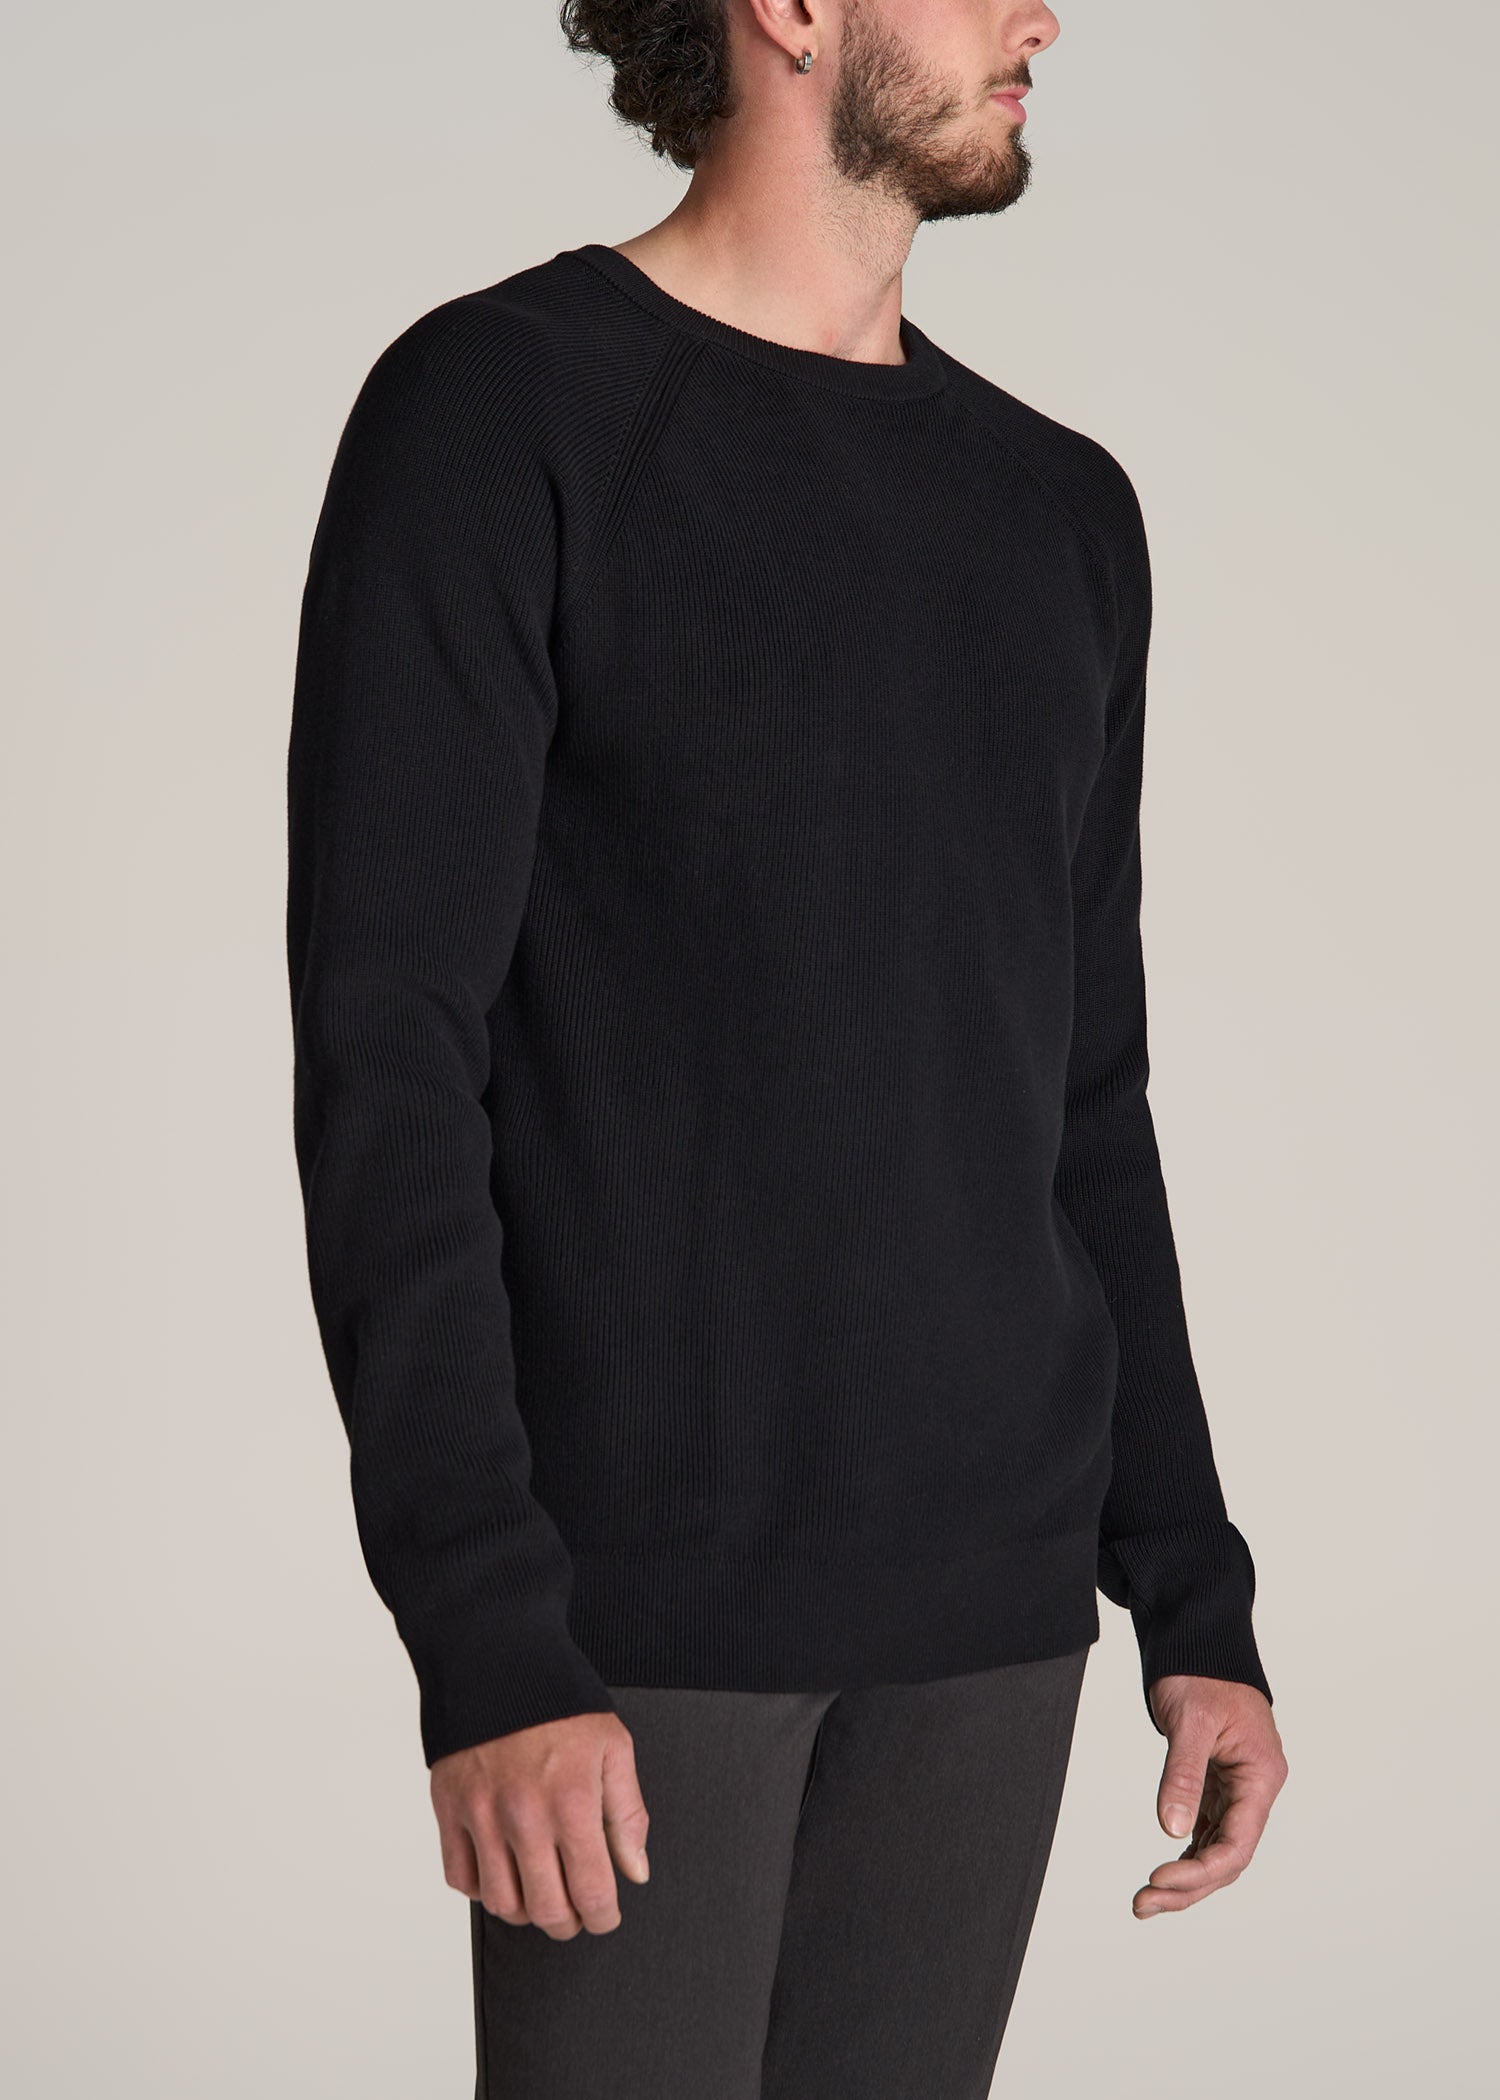 American-Tall-Men-Textured-Knit-Sweater-Black-side